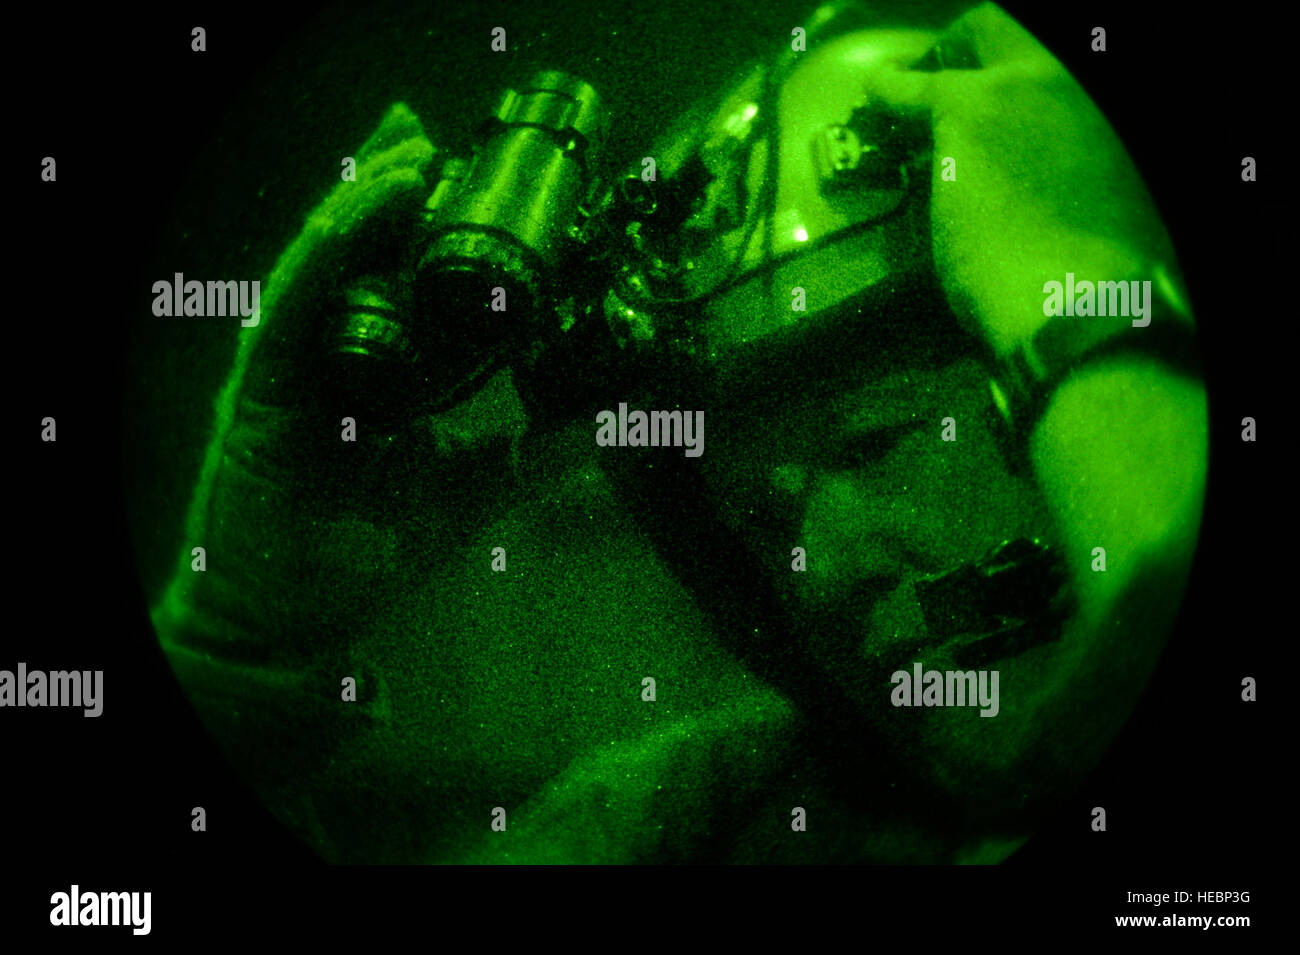 New York Air National Guard Master Sgt. Jerry Kurz, 102nd Rescue Squadron loadmaster, based at F.S. Gabreski Airport in Westhampton Beach, N.Y., adjusts his night vision goggles on board an HC-130P King during Exercise Southern Strike 15 (SS15) near the Combat Readiness Training Center (CRTC) in Gulfport, Miss., Oct. 30, 2014. SS15 is a total force, multiservice training exercise hosted by the Mississippi National Guard's CRTC Oct. 27 through Nov. 7, 2014. The SS15 exercise emphasizes air-to-air, air-to-ground and special operations forces training opportunities. These events are integrated in Stock Photo